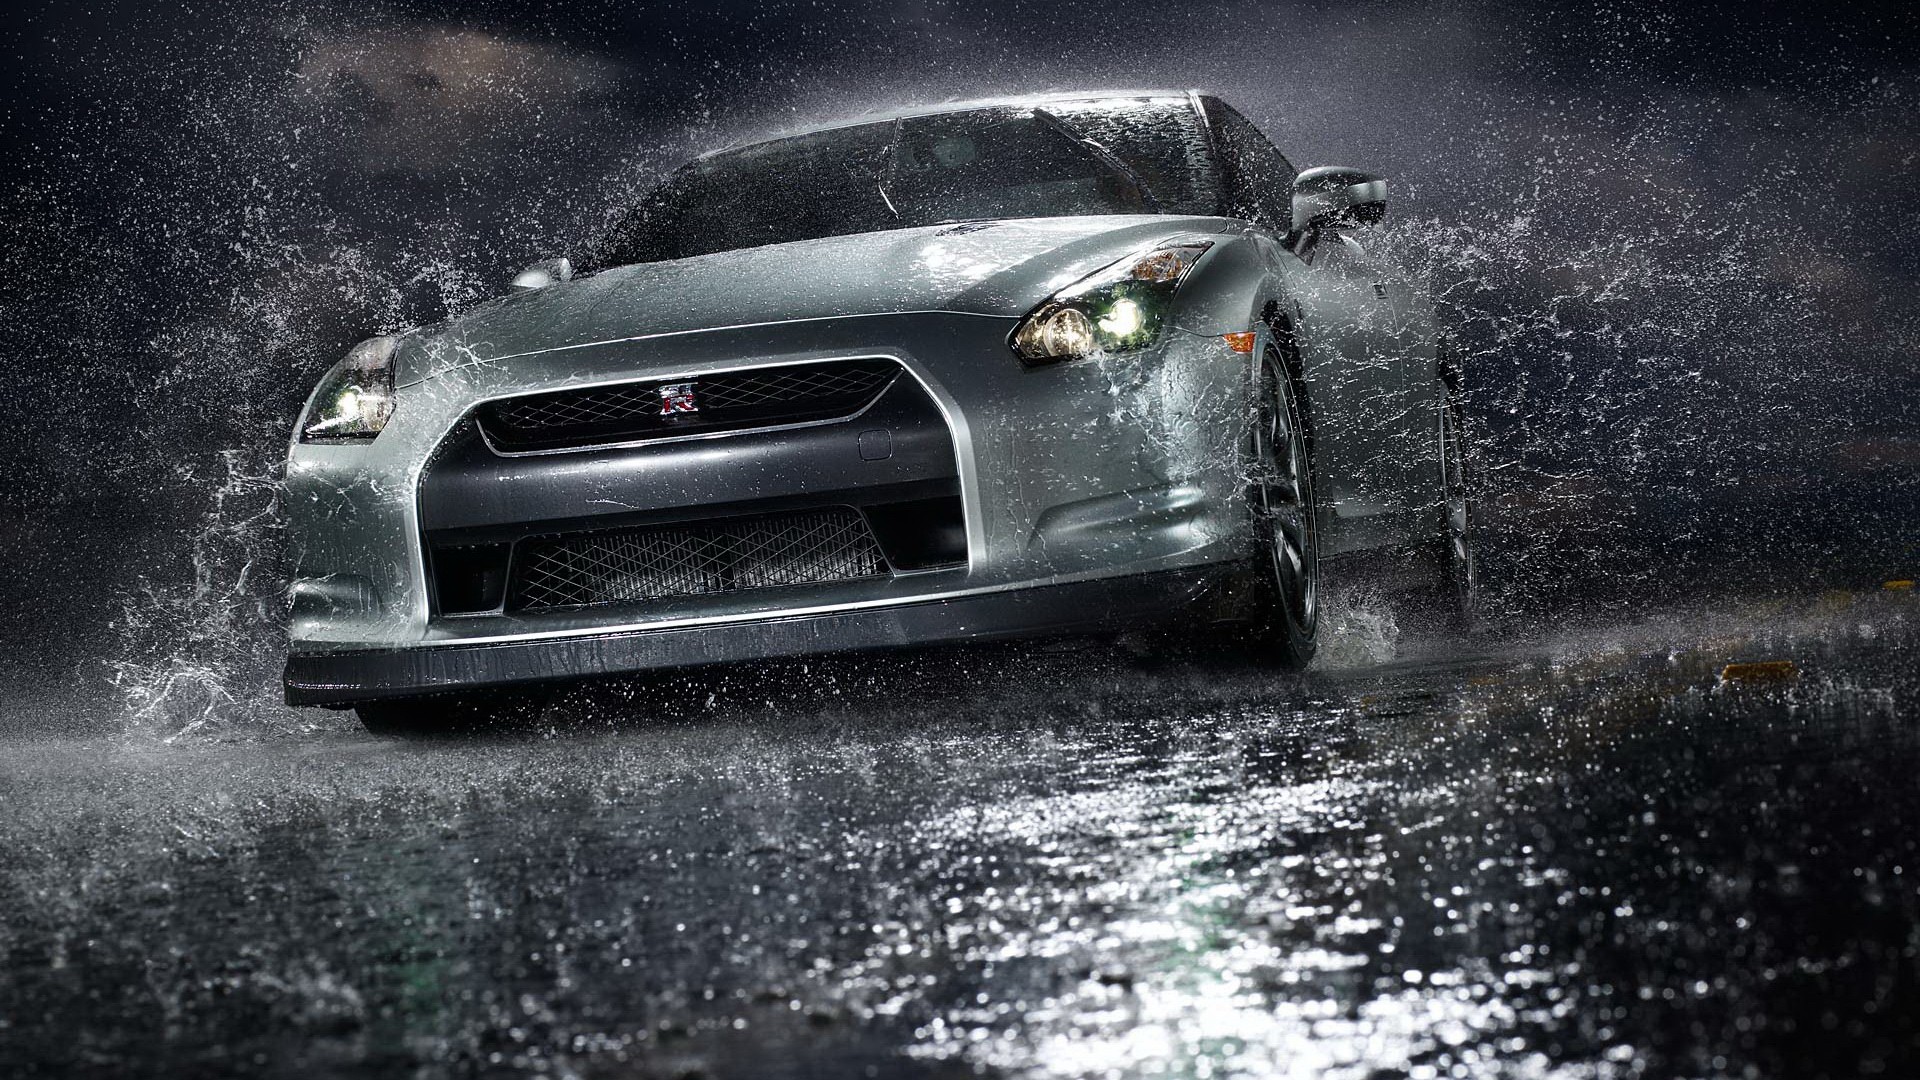 Nissan Gtr Photos Download The BEST Free Nissan Gtr Stock Photos  HD  Images